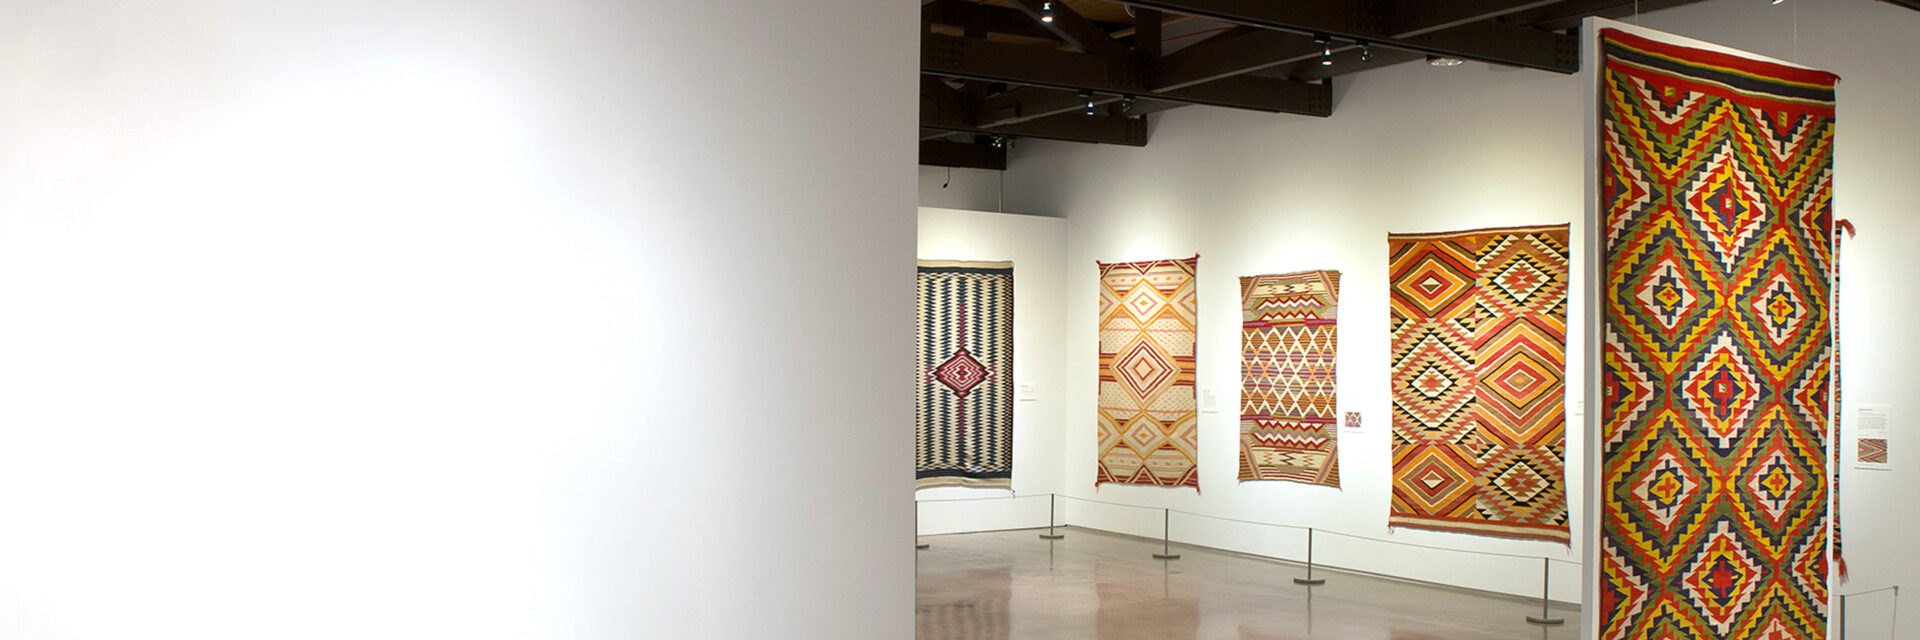 A collection of colorful rugs in a museum.